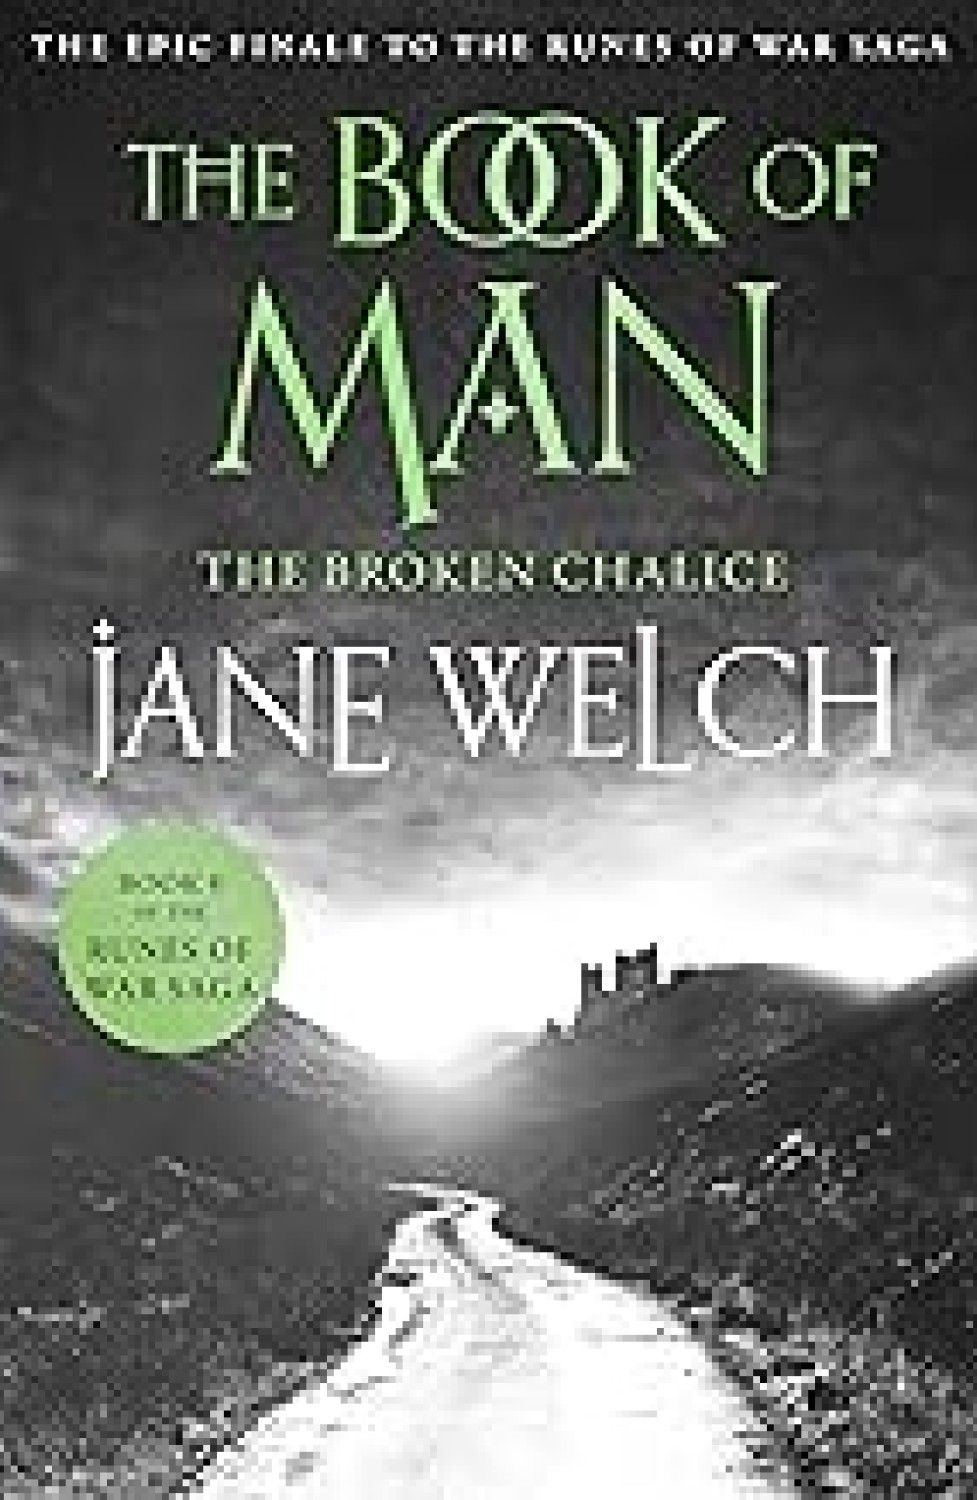 THE BOOK OF MAN : THE BROKEN CHALICE